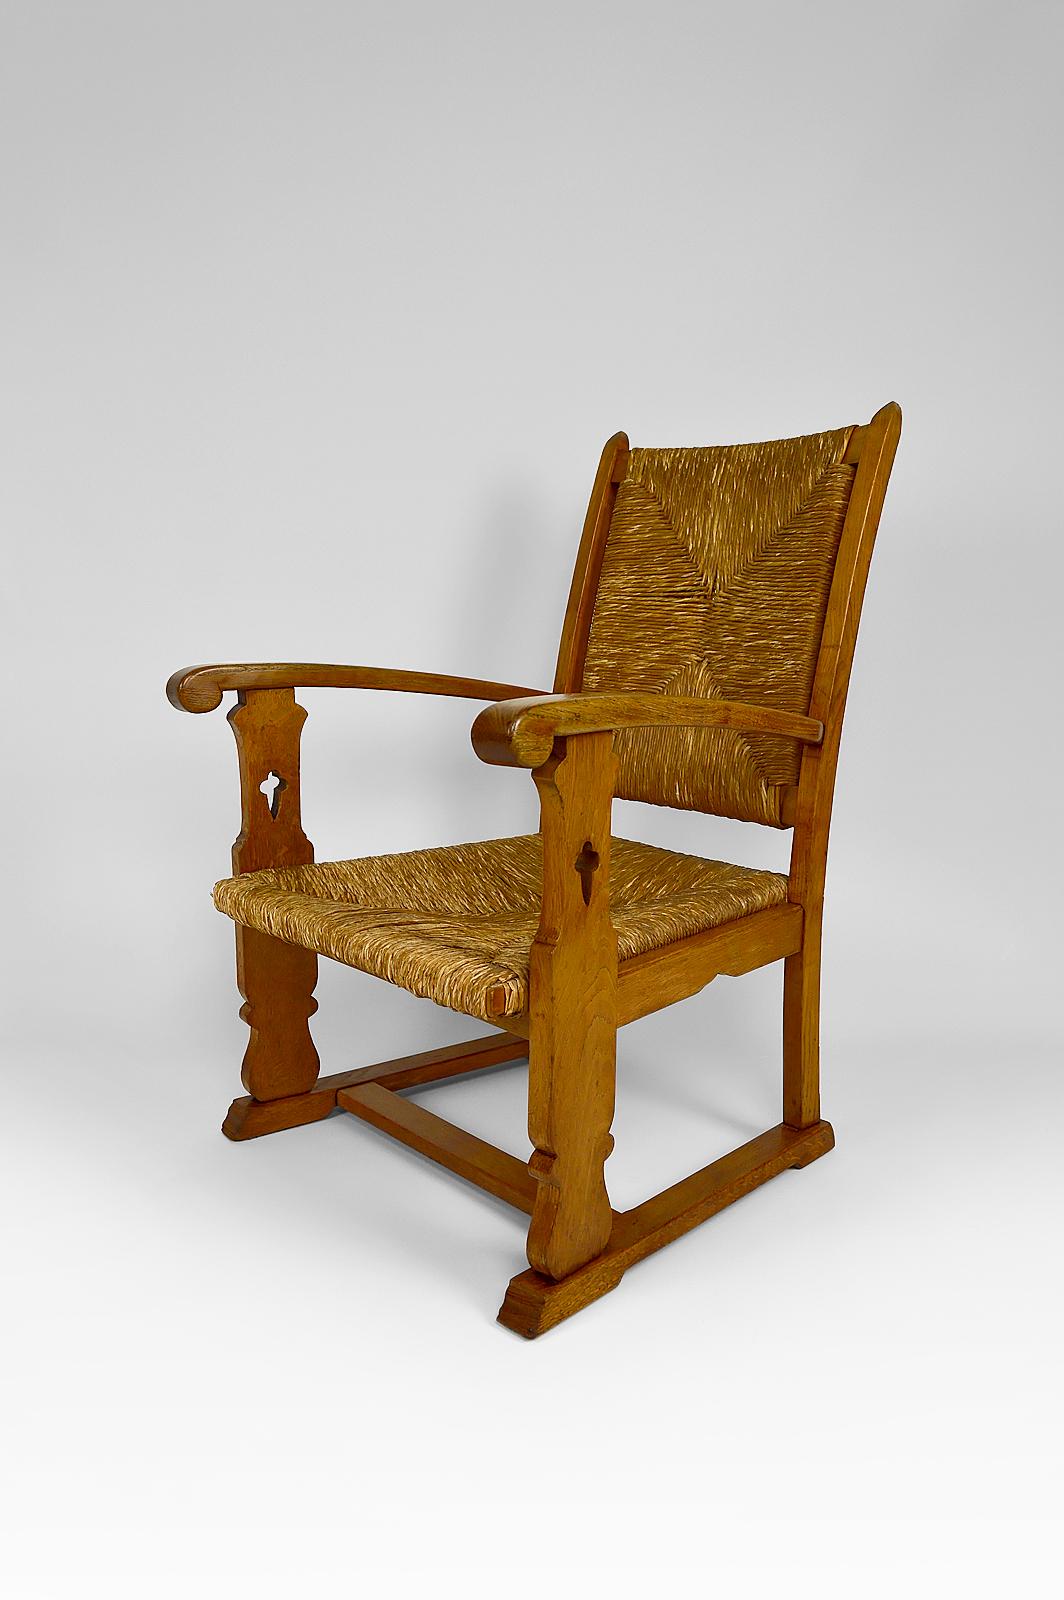 Art & Crafts / Gothic Revival Armchair in Oak and Straw, circa 1900 4